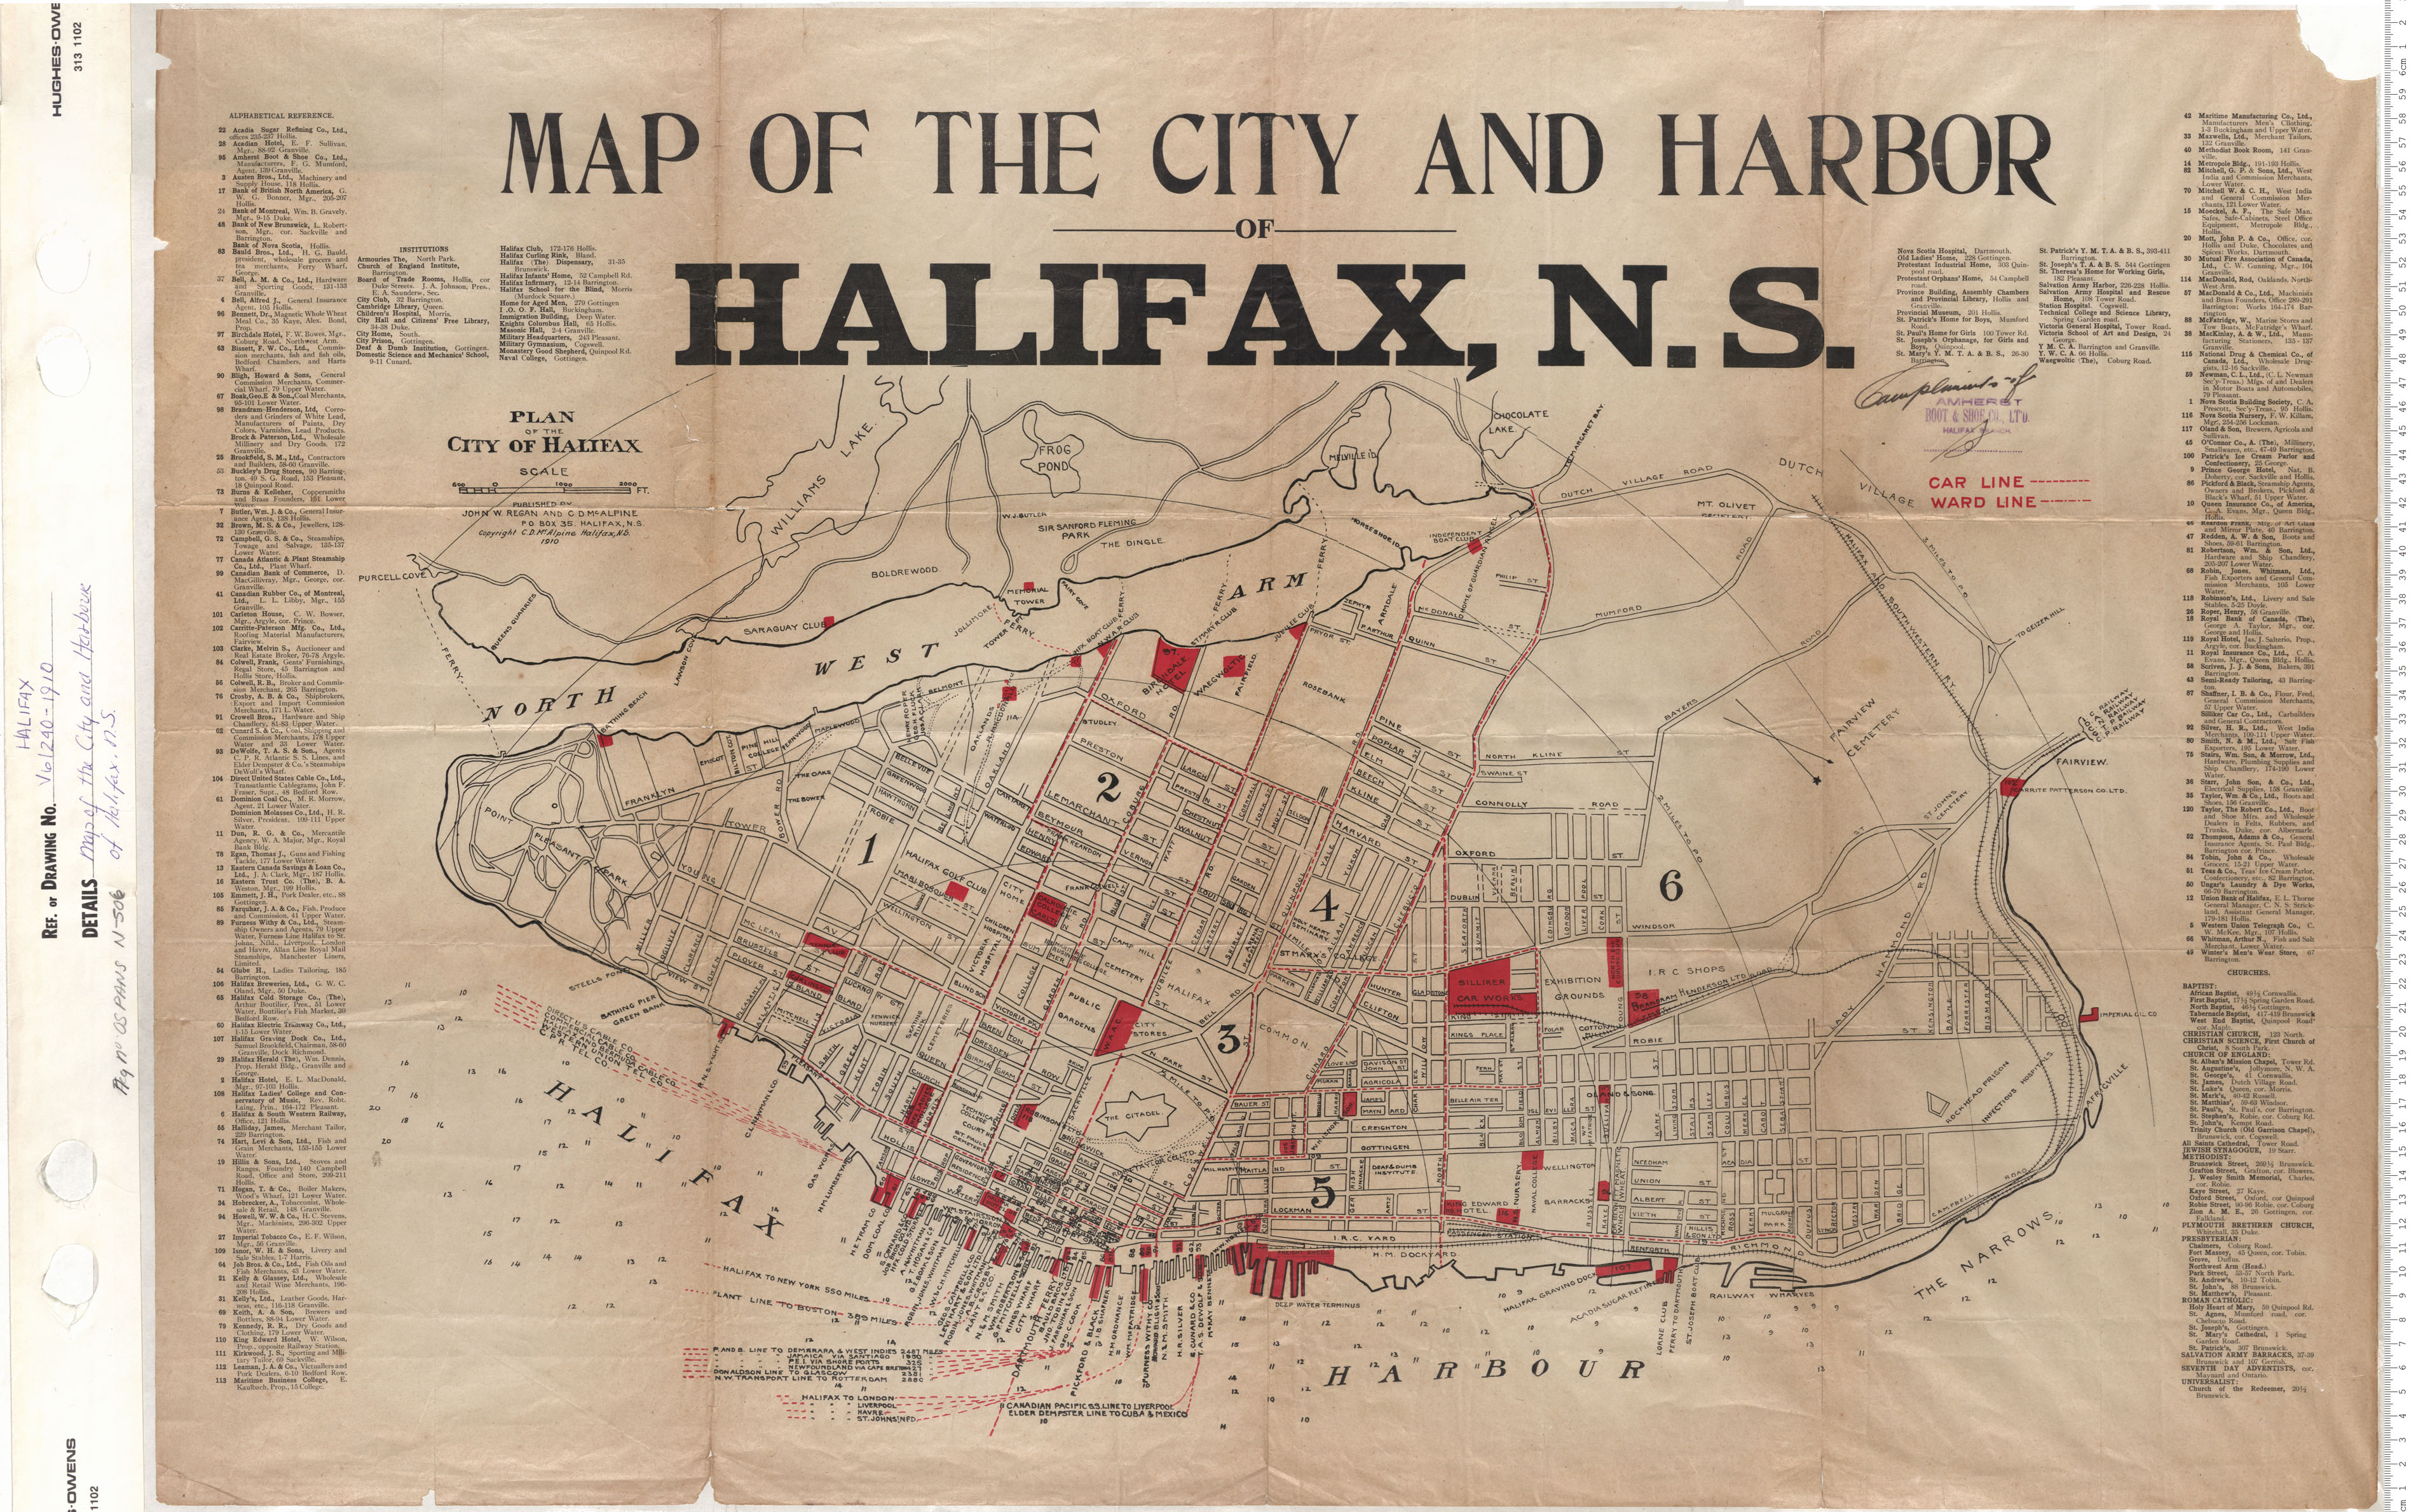 Map of the City and Harbour of Halifax, N.S.